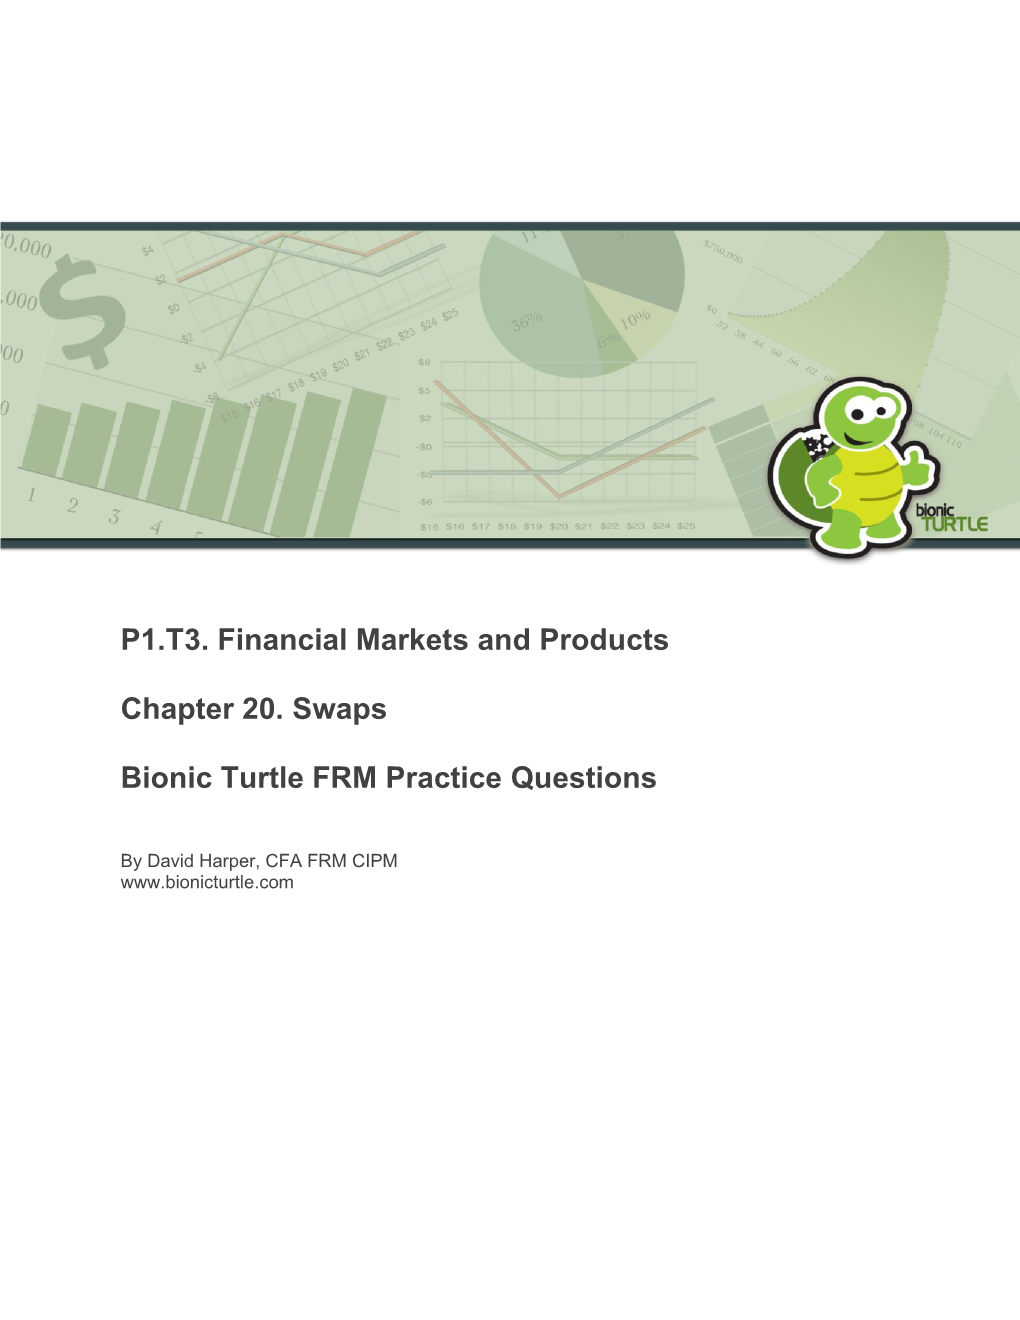 P1.T3. Financial Markets and Products Chapter 20. Swaps Bionic Turtle